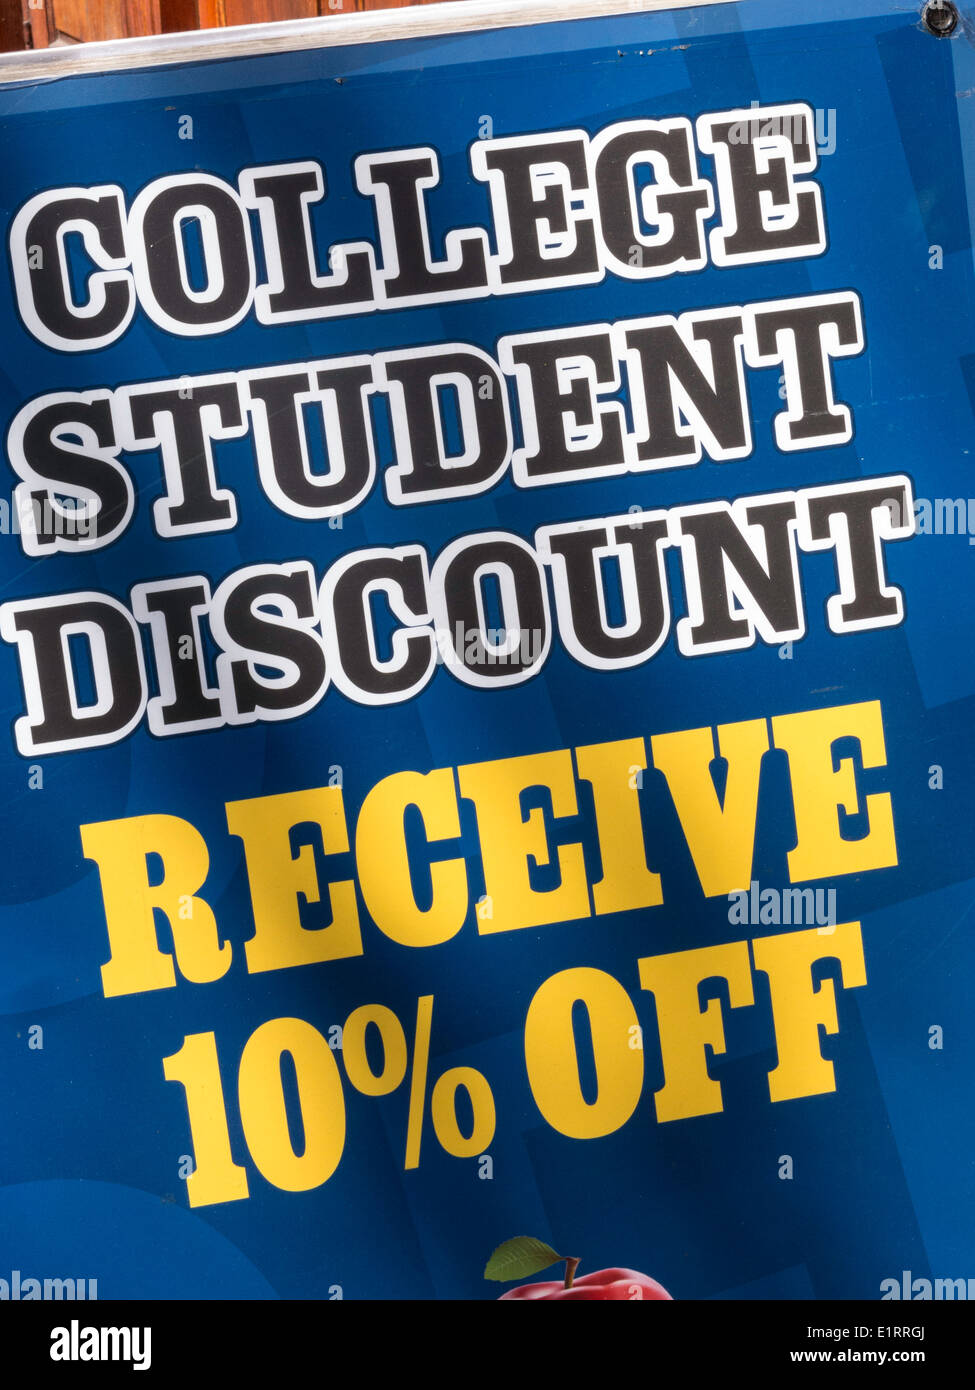 InStore College Student Discount Sign, Receive 10% Off, USA Stock Photo